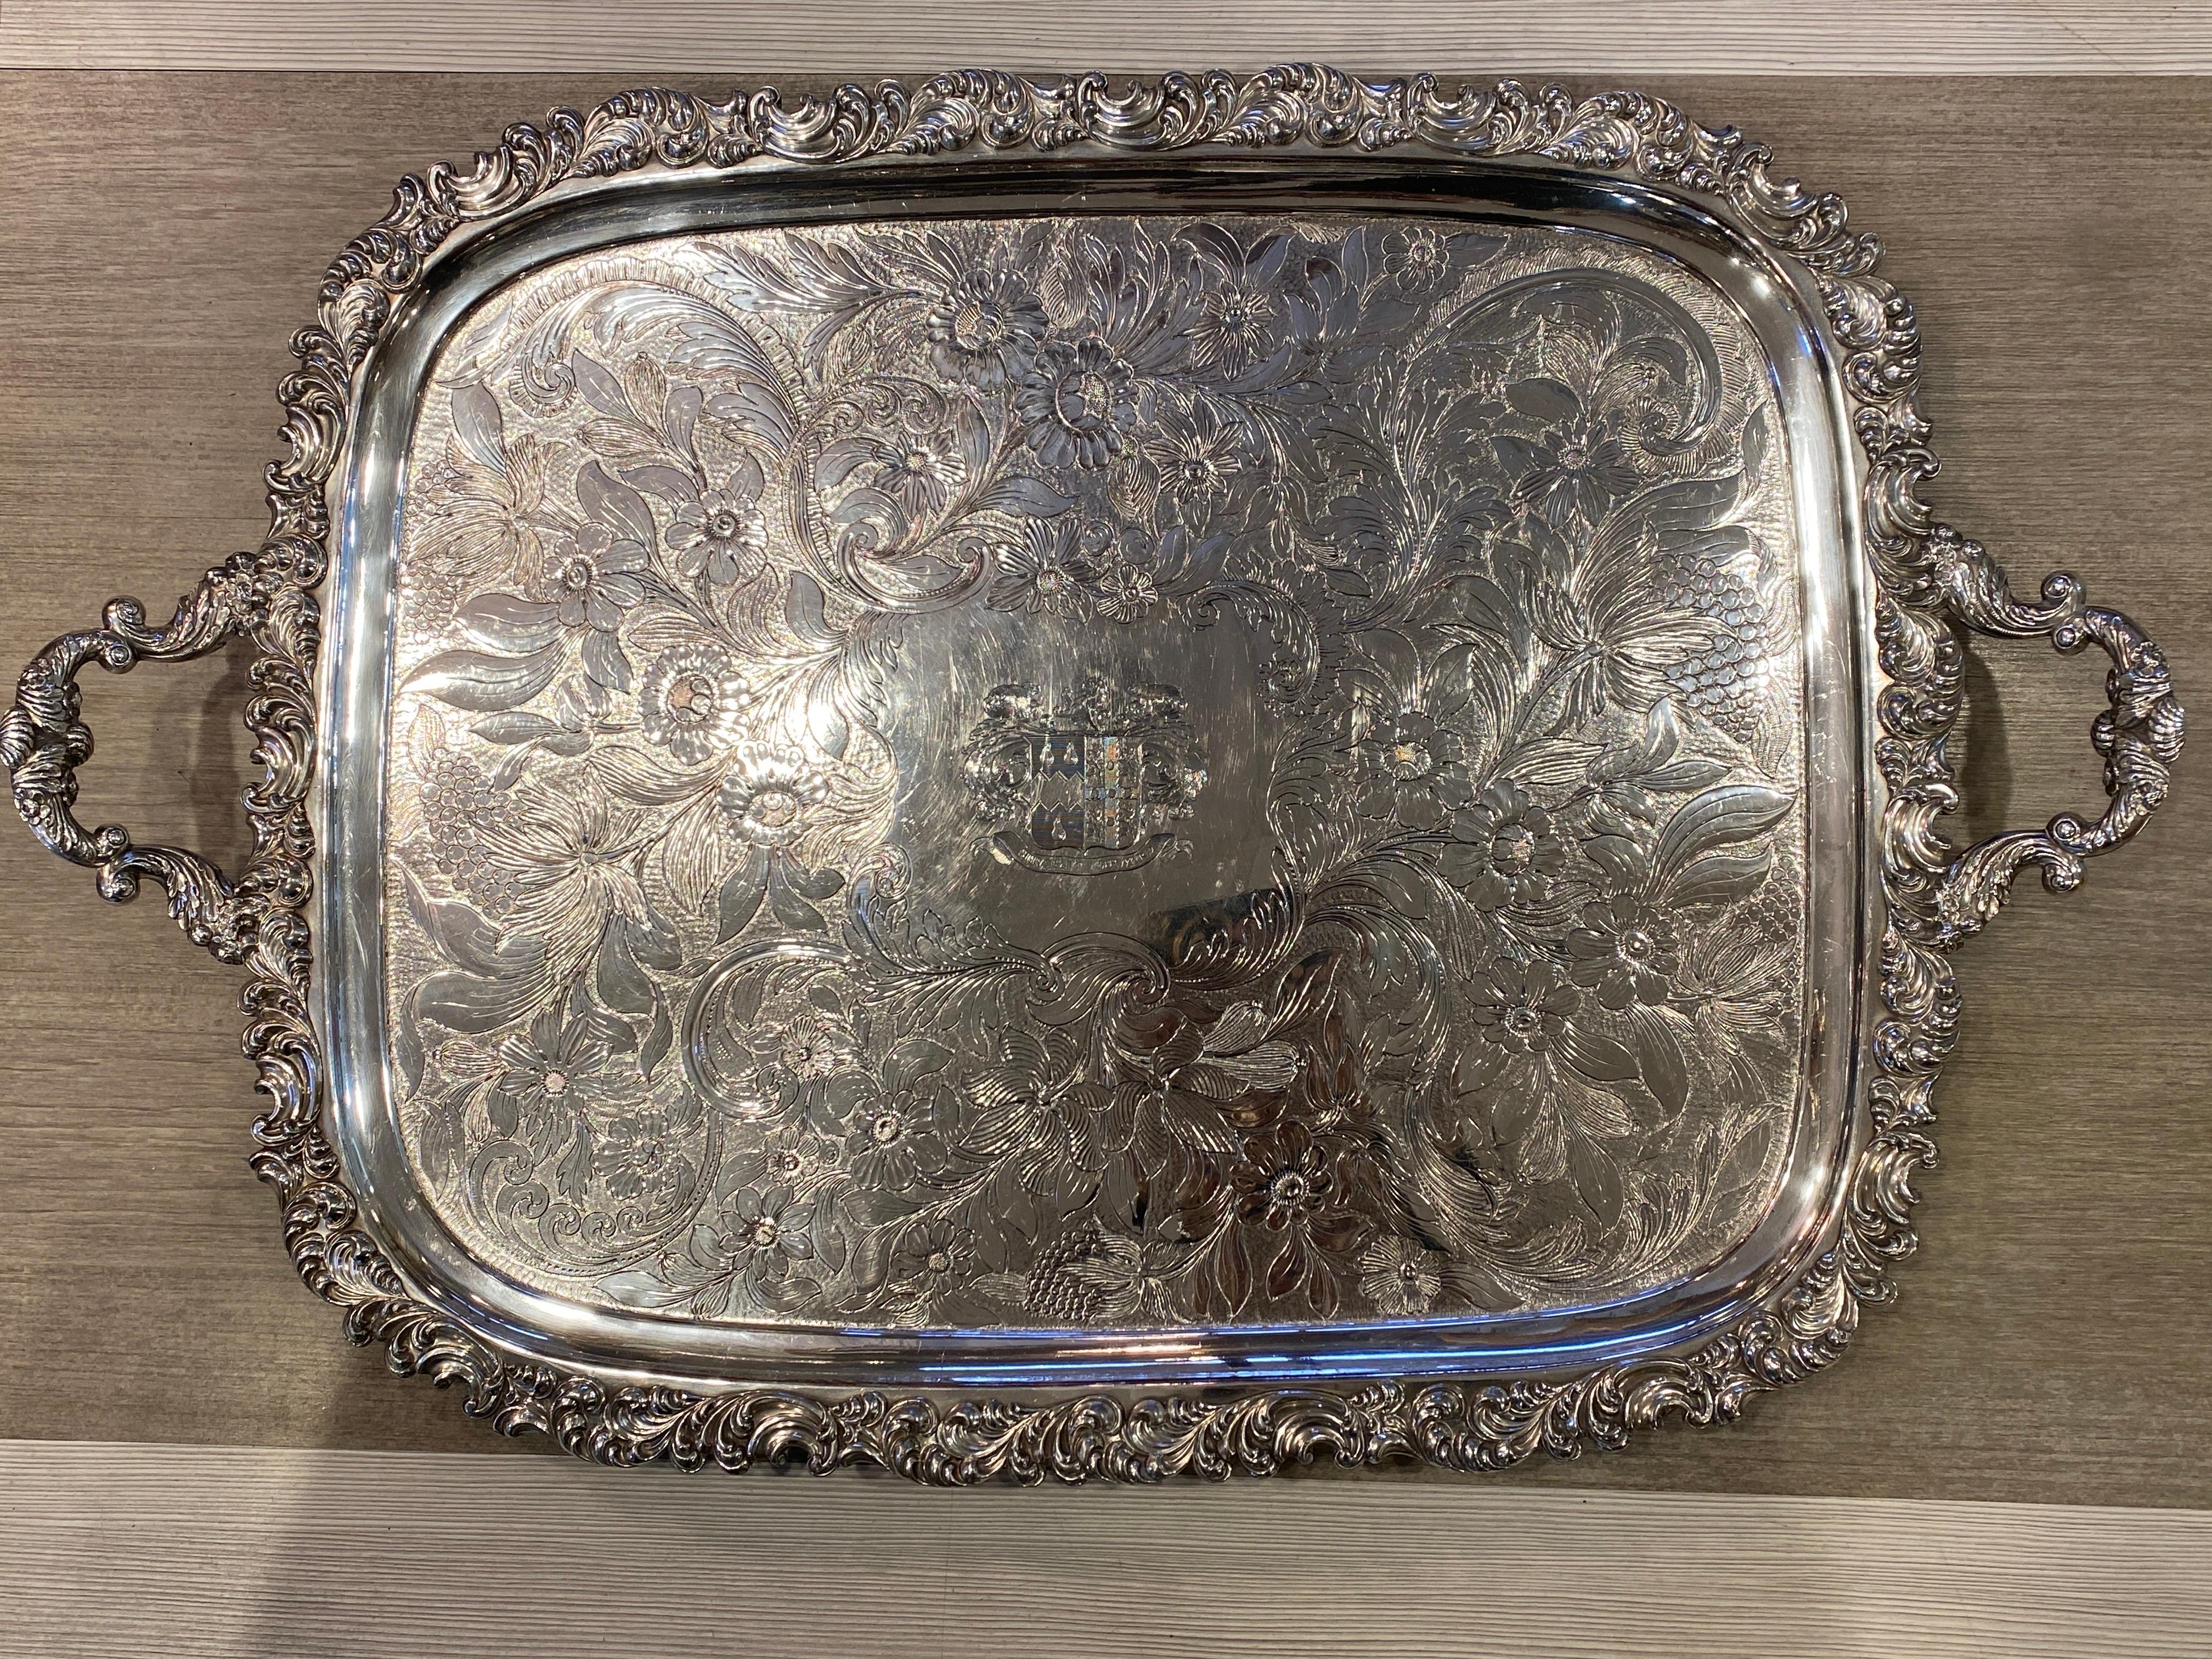 Up for your consideration is this very large and extremely fine early 19th century Old Sheffield shaped oblong handled tea tray.   The tray features a deep set, and heavily ornate scrolling border with elegant handles decorated with acanthus leaves